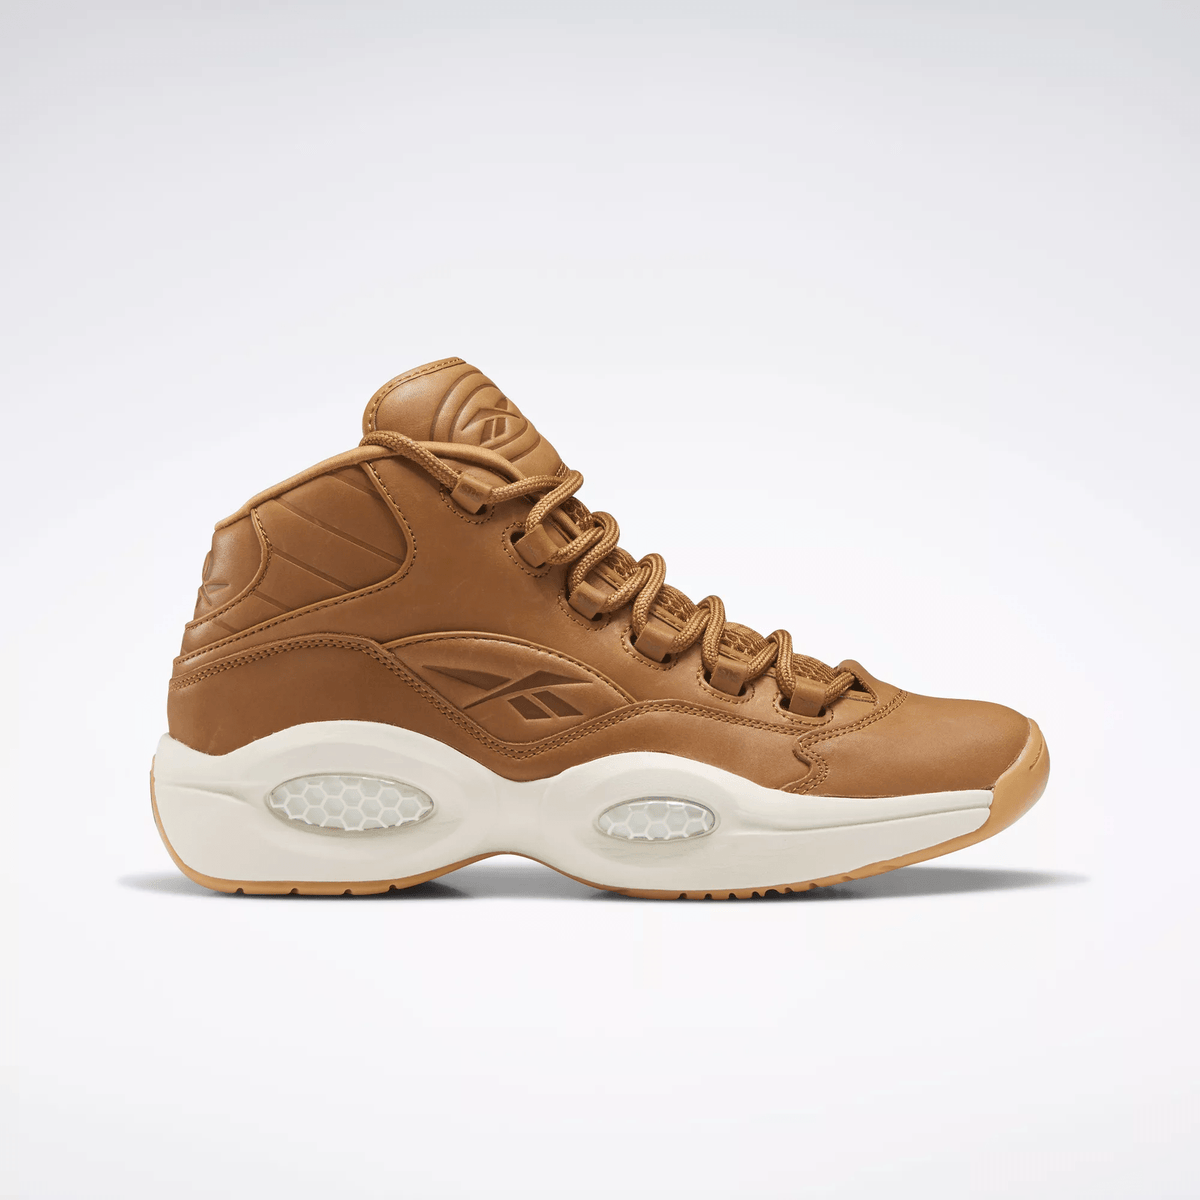 Reebok Men's SNS Question Mid Basketball Shoes Brown